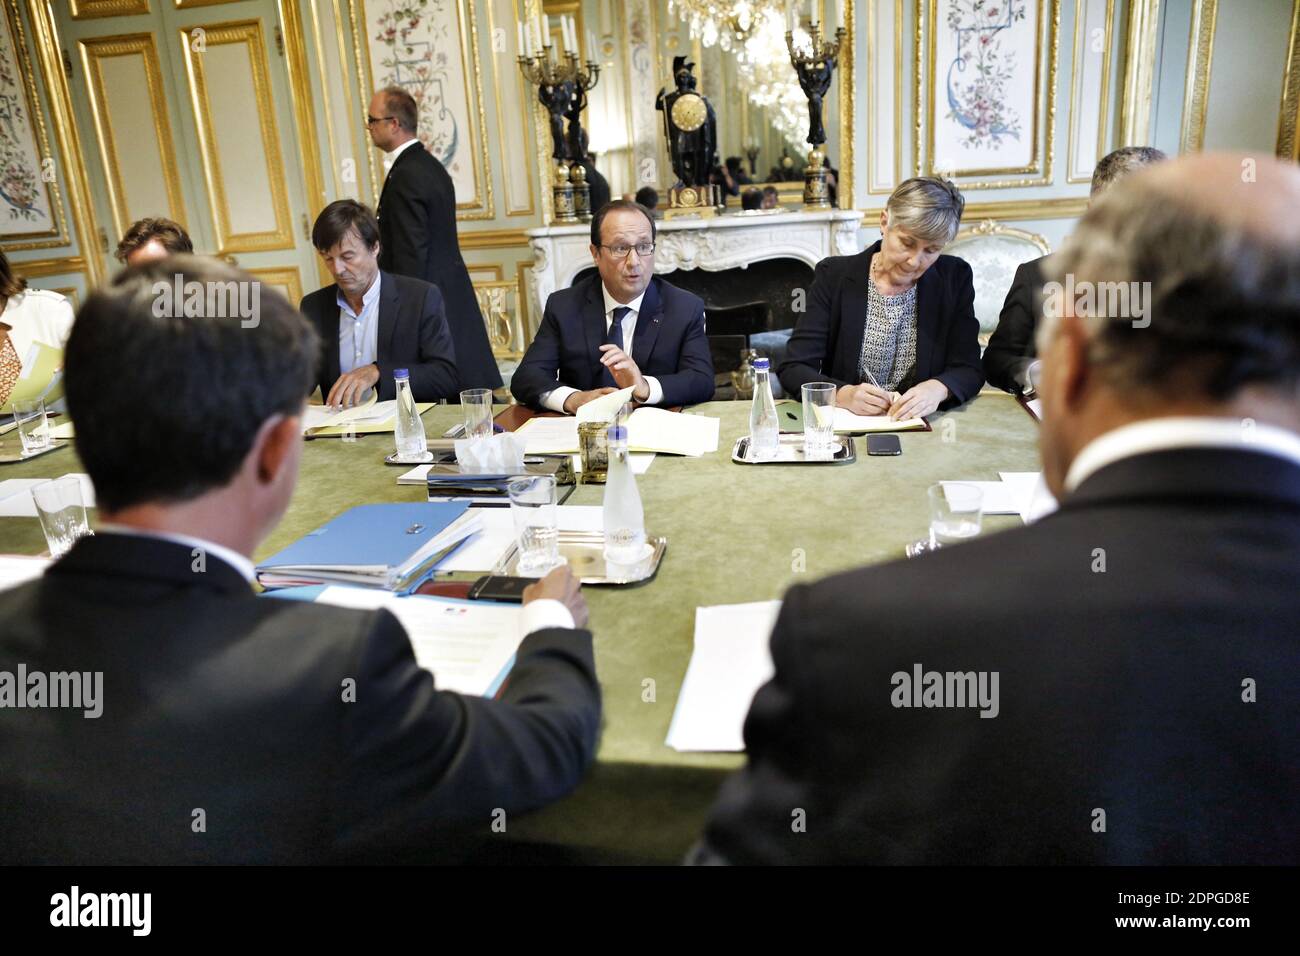 French President Francois Hollande (C) presides over a ministerial meeting including Prime Minister Manuel Valls (foreground, L), Minister of Ecology, Sustainable Development and Energy Segolene Royal (unpictured), Minister of Foreign Affairs and International Development Laurent Fabius (foreground, R), environmental activist and President Hollande's special envoy for the protection of the planet Nicolas Hulot (background, L) and COP21 special representative Laurence Tubiana (background, R), in preparation for the COP21 Climate Conference to be held in Paris in December 2015, at the Elysee Pal Stock Photo